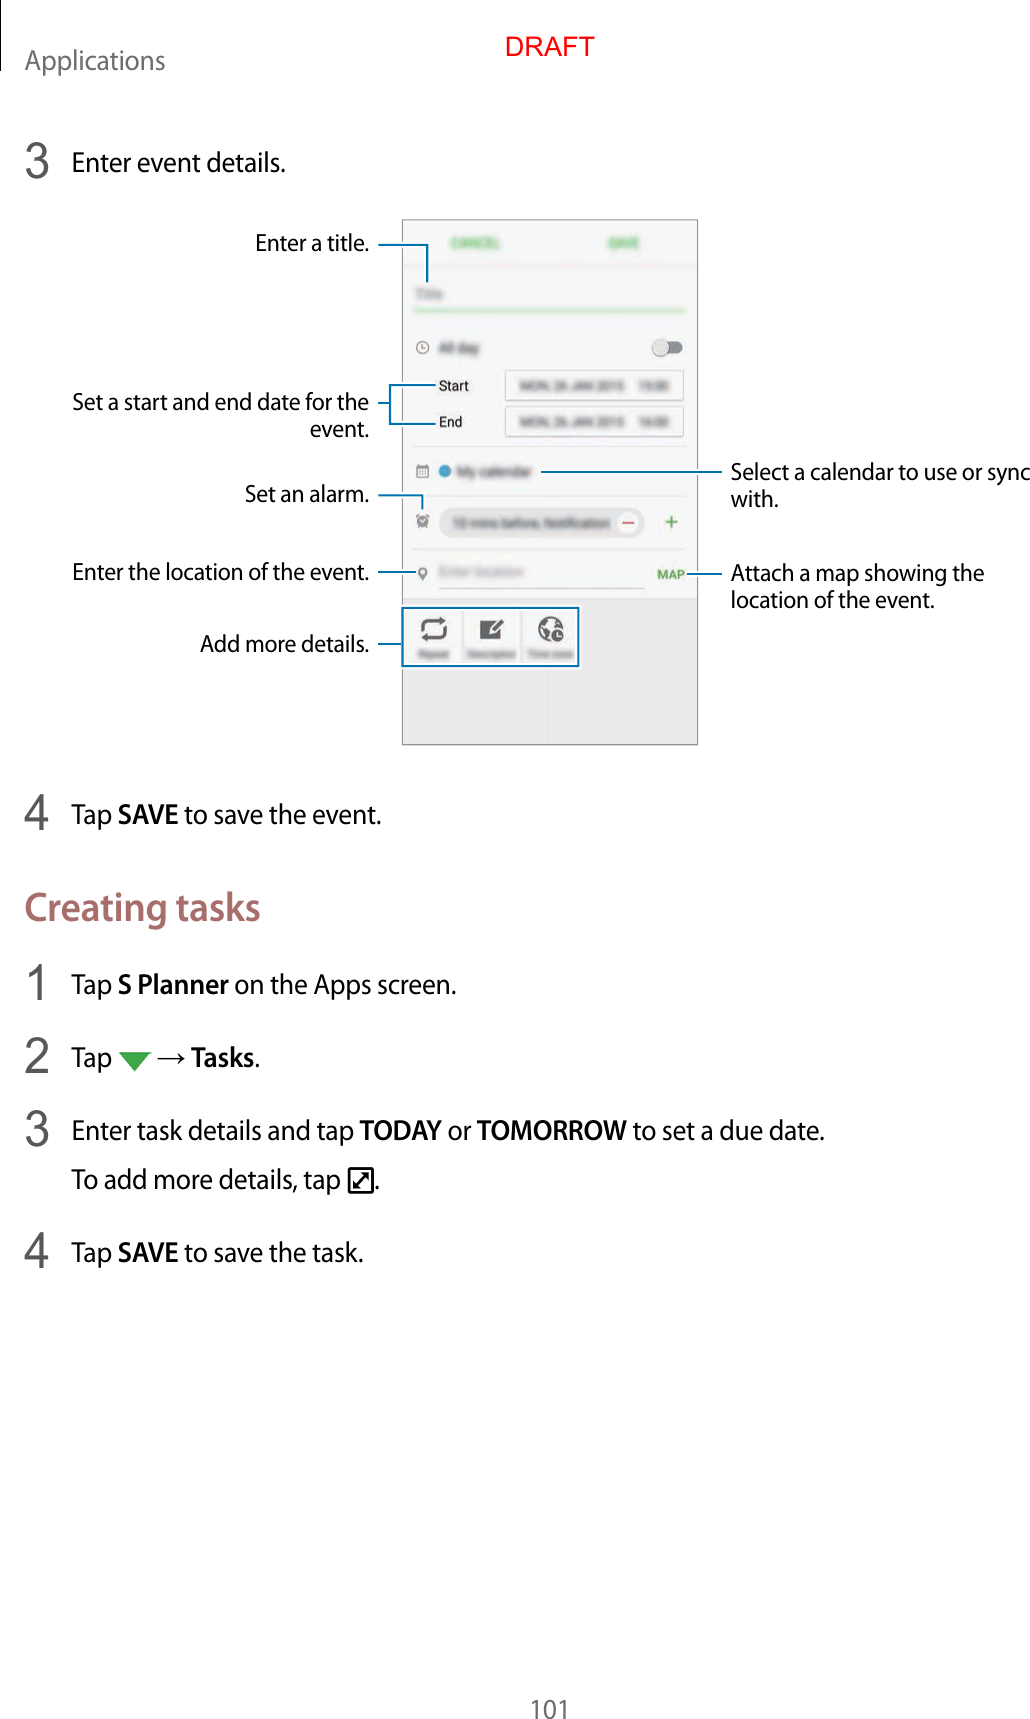 Applications1013  Enter ev ent details .Select a calendar to use or sync with.Attach a map showing the location of the event .Enter the location of the ev ent .Enter a title .Set a start and end date f or the event.Add mor e details .Set an alarm.4  Tap SAVE to sav e the ev en t.Crea ting tasks1  Tap S Planner on the Apps screen.2  Tap    Tasks.3  Enter task details and tap TODAY or TOMORROW to set a due date.To add more details , tap  .4  Tap SAVE to sav e the task.DRAFT